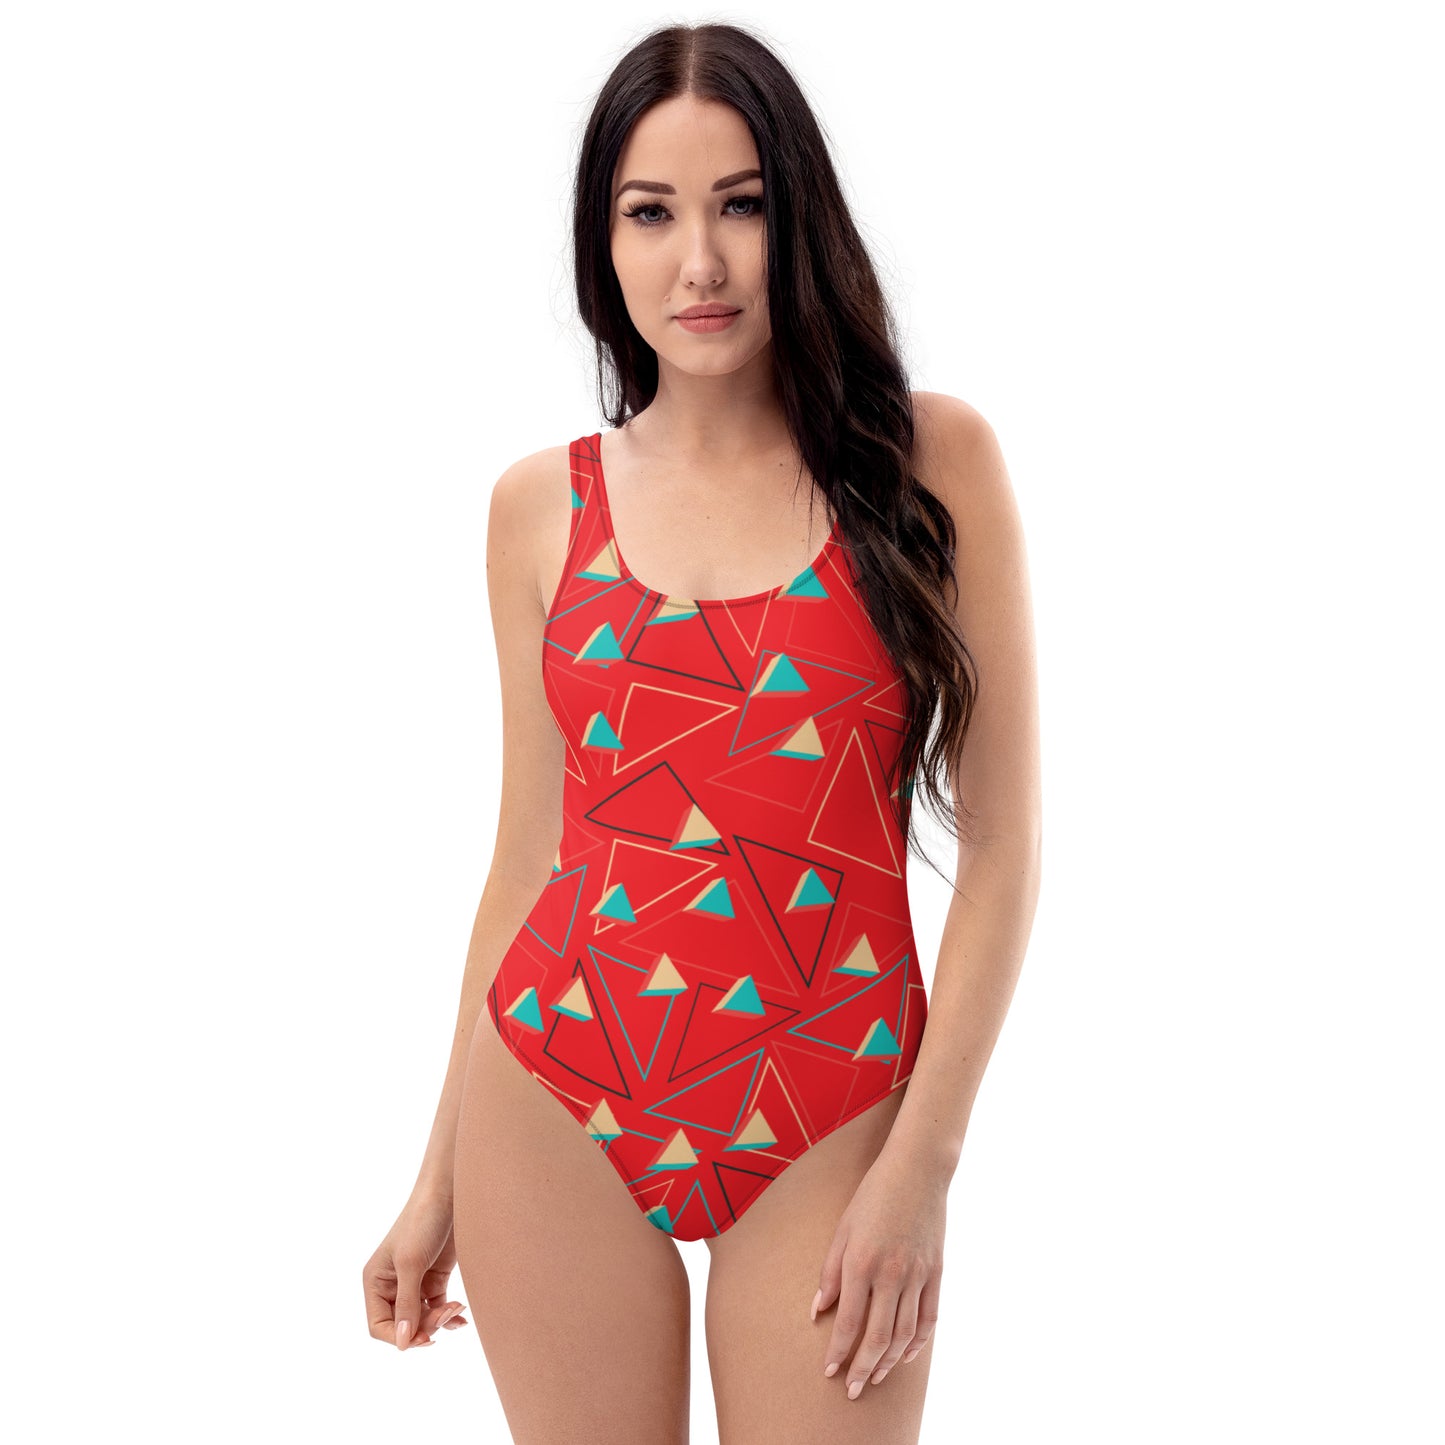 Triangular Candied Red One-Piece Swimsuit TeeSpect